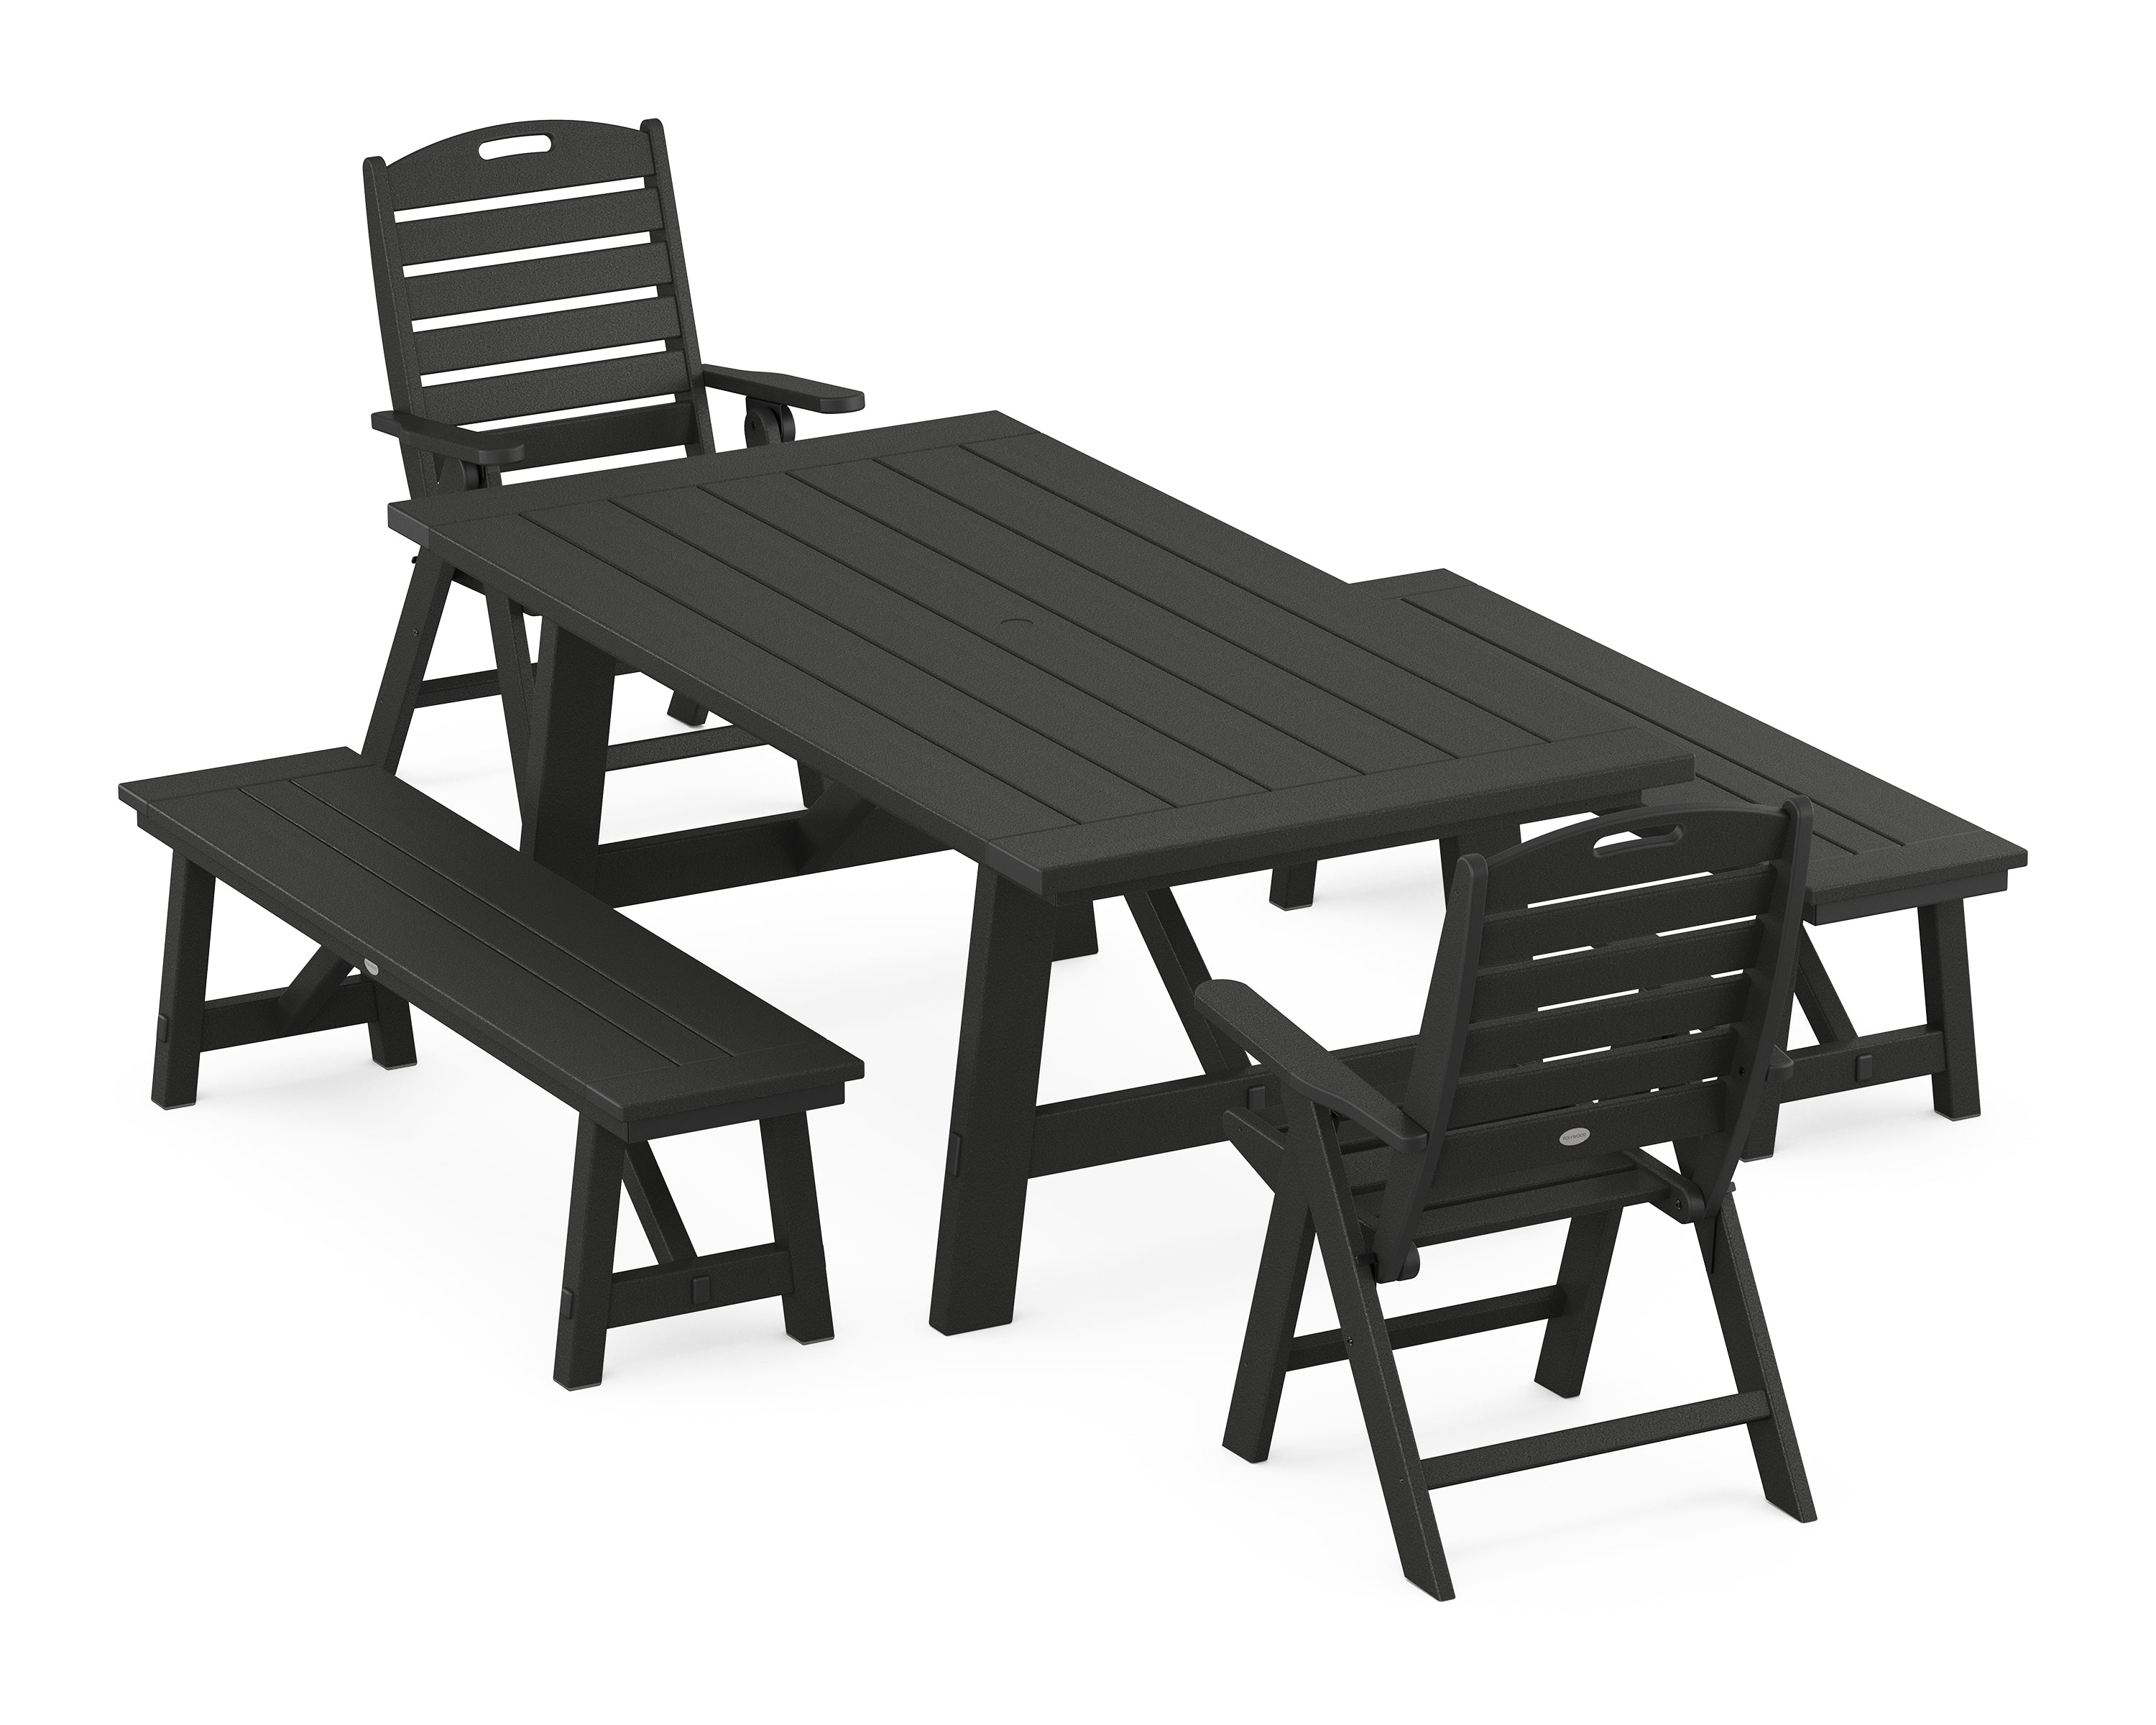 POLYWOOD® Nautical Folding Highback Chair 5-Piece Rustic Farmhouse Dining Set With Benches in Black